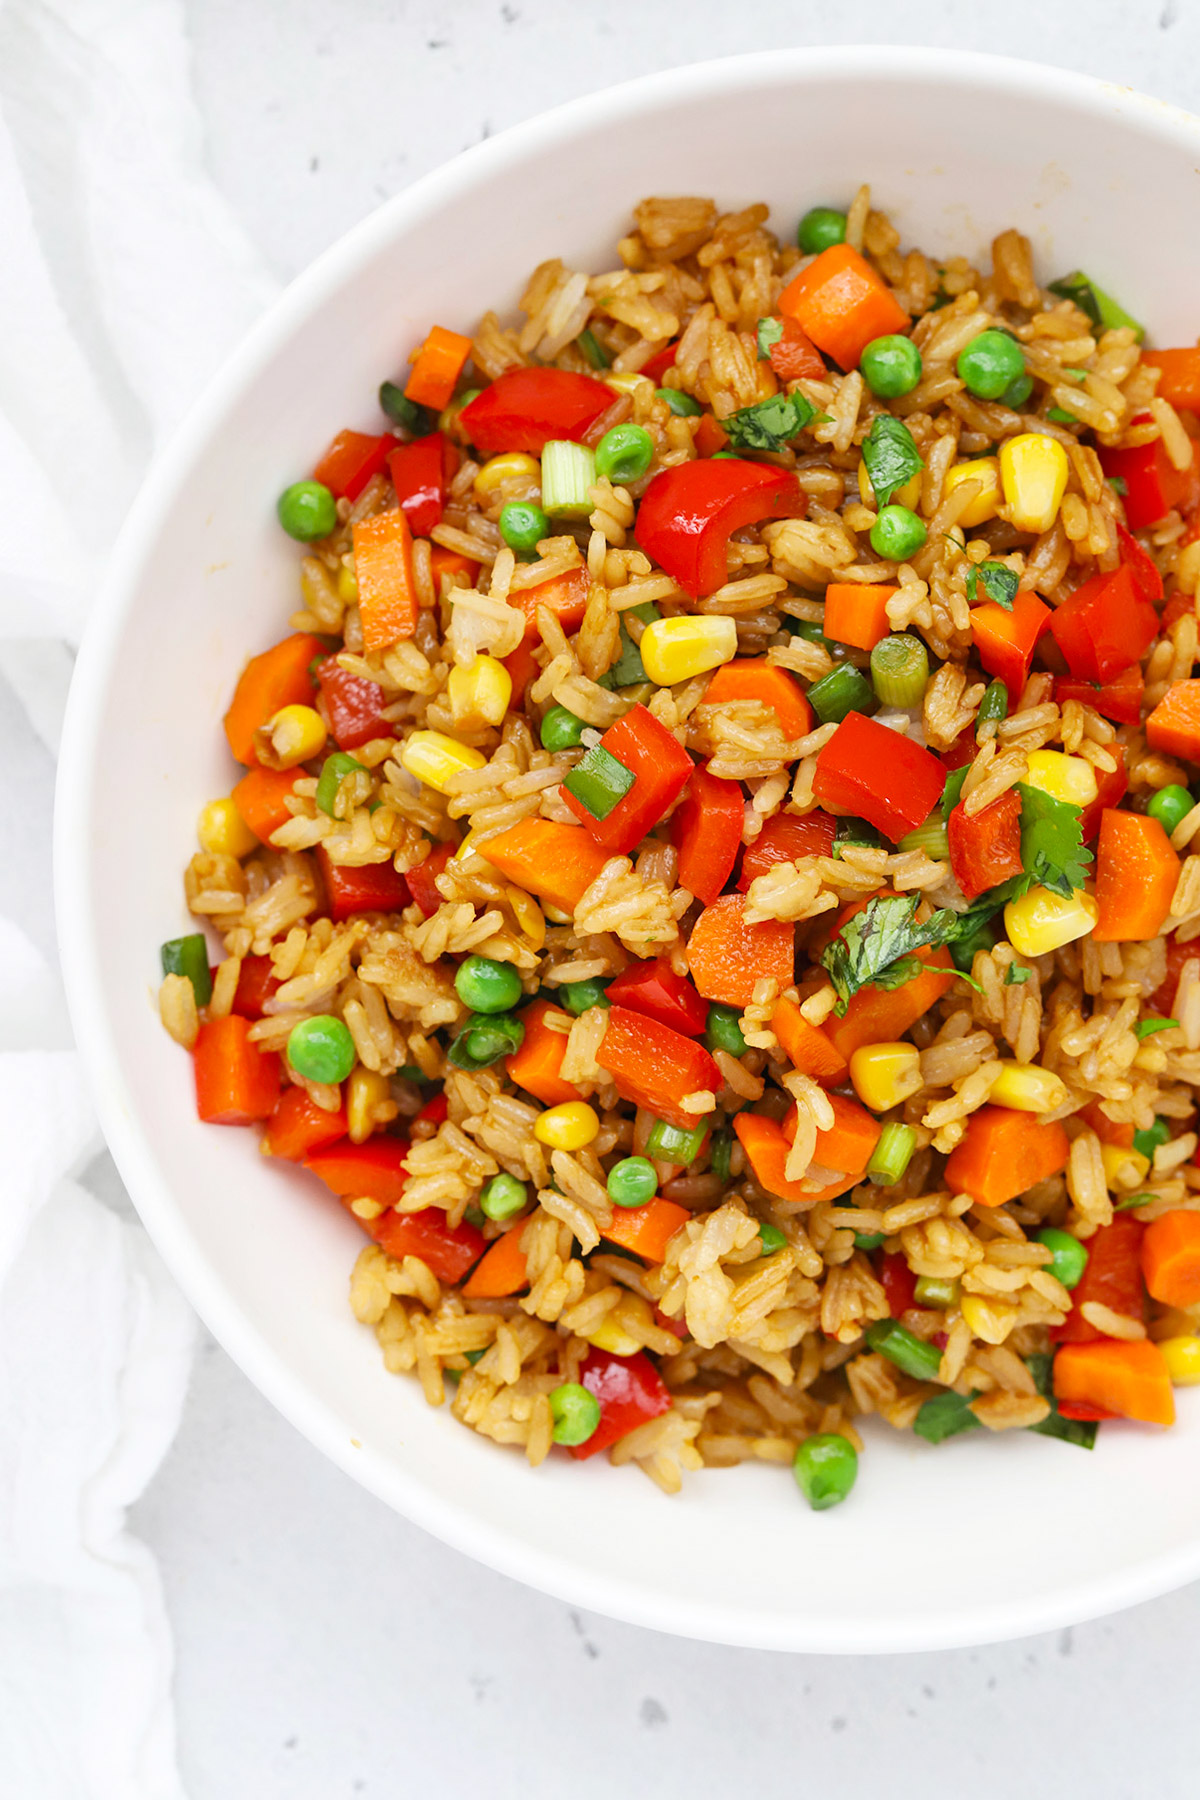 Overhead view of a serving bowl of healthy vegetarian fried rice with colorful veggies